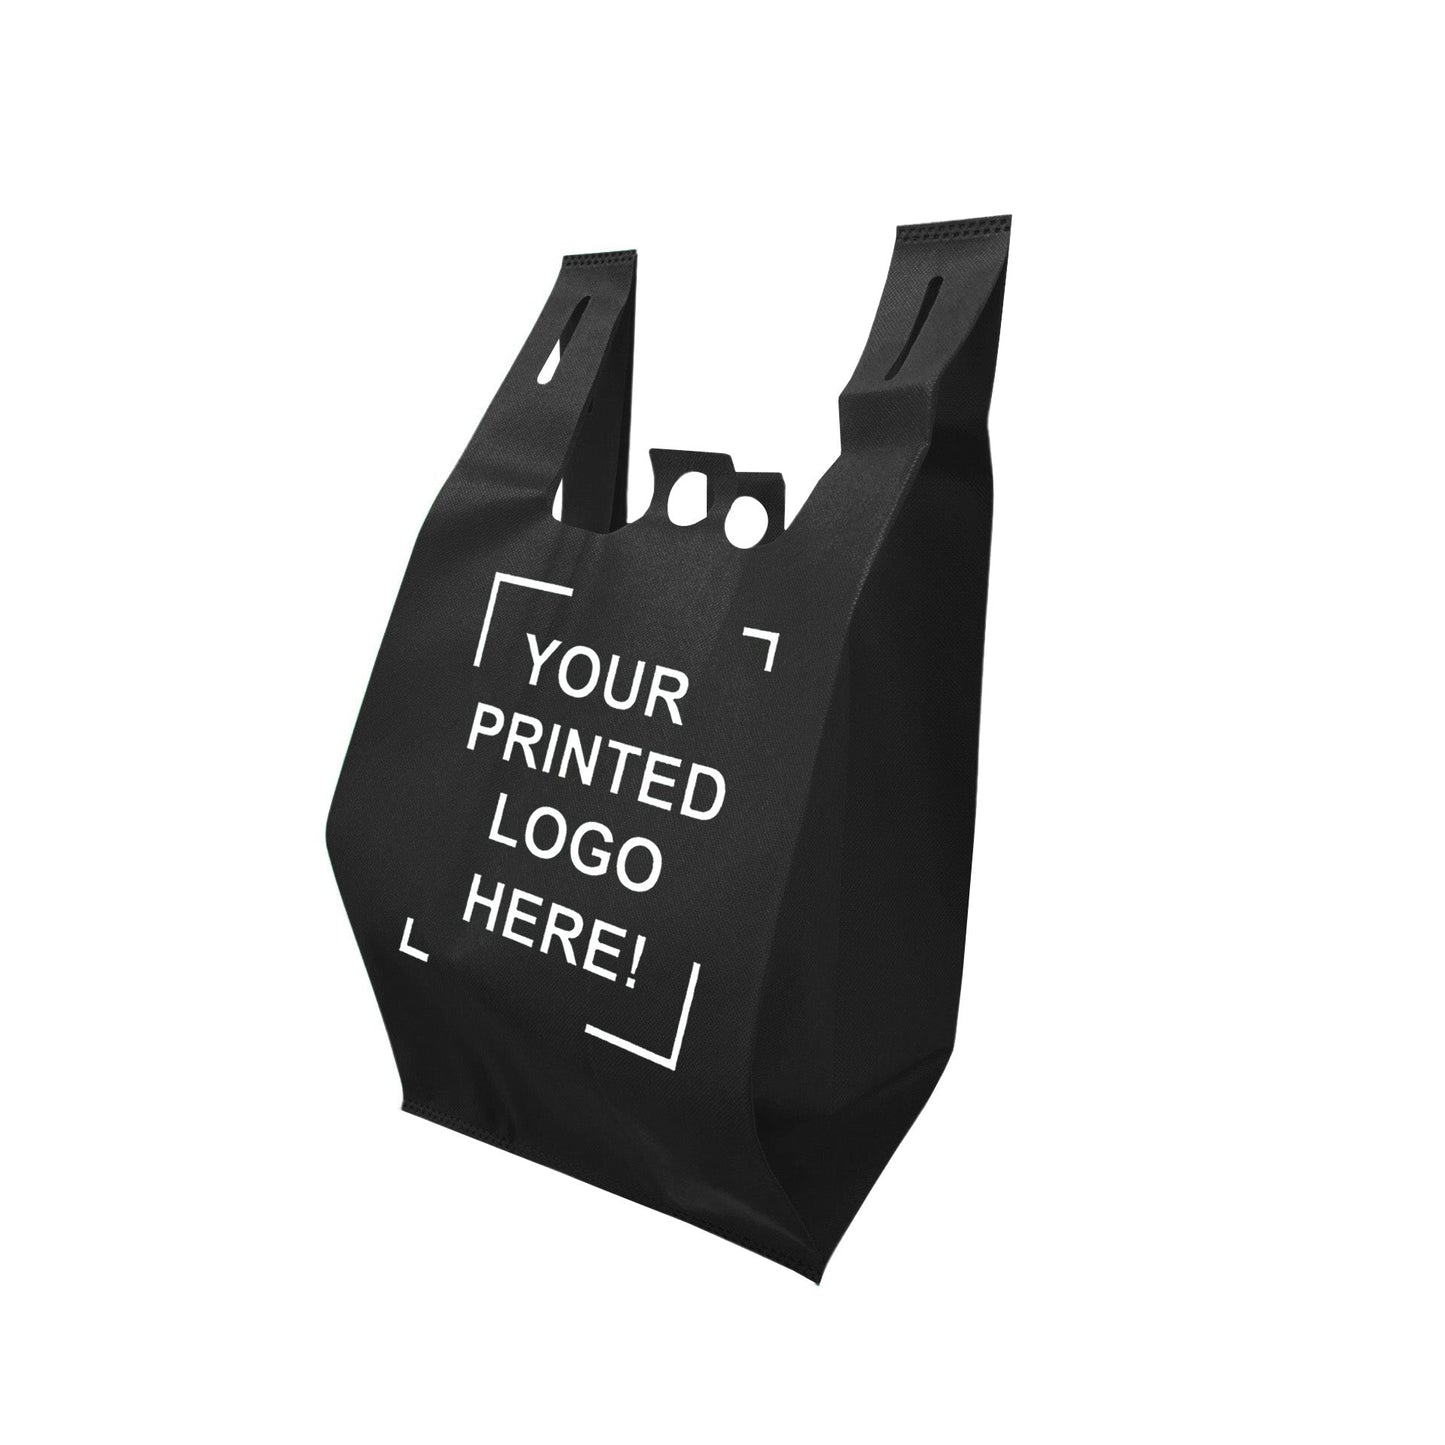 200pcs, Non-Woven Reusable T-Shirt Bag 11x7x20 inches Black Shopping Bags Pinch Bottom, One Color Custom Print, Printed in Canada